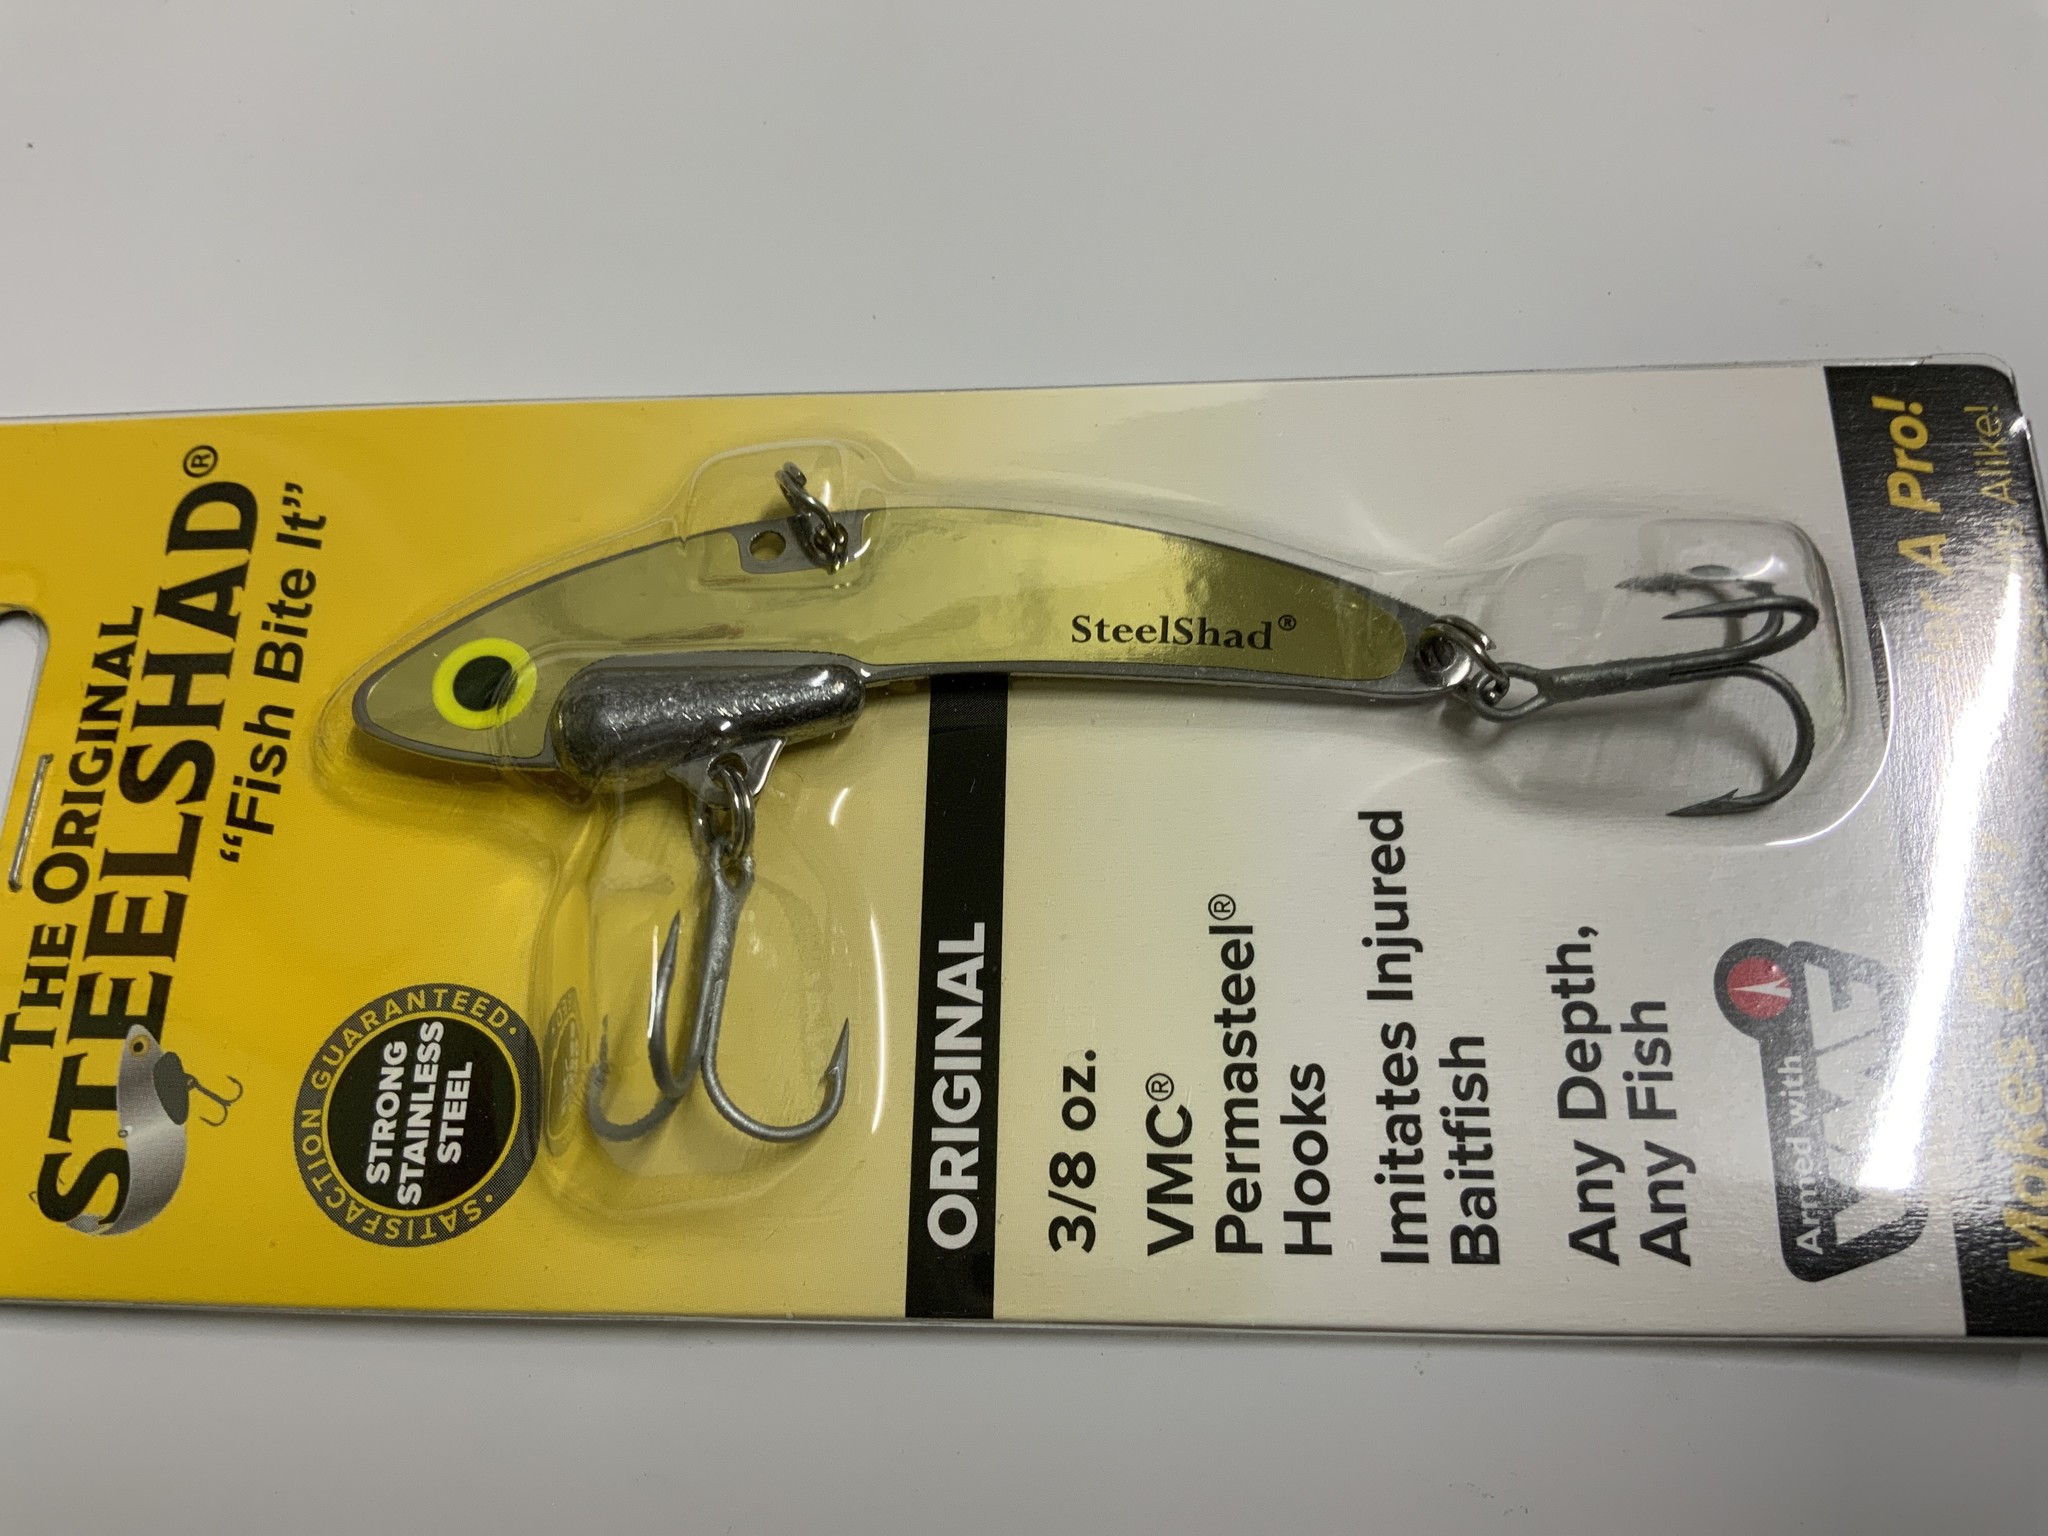 Learn About Top Baits For August Great Lakes Salmon - Pautzke Bait Co